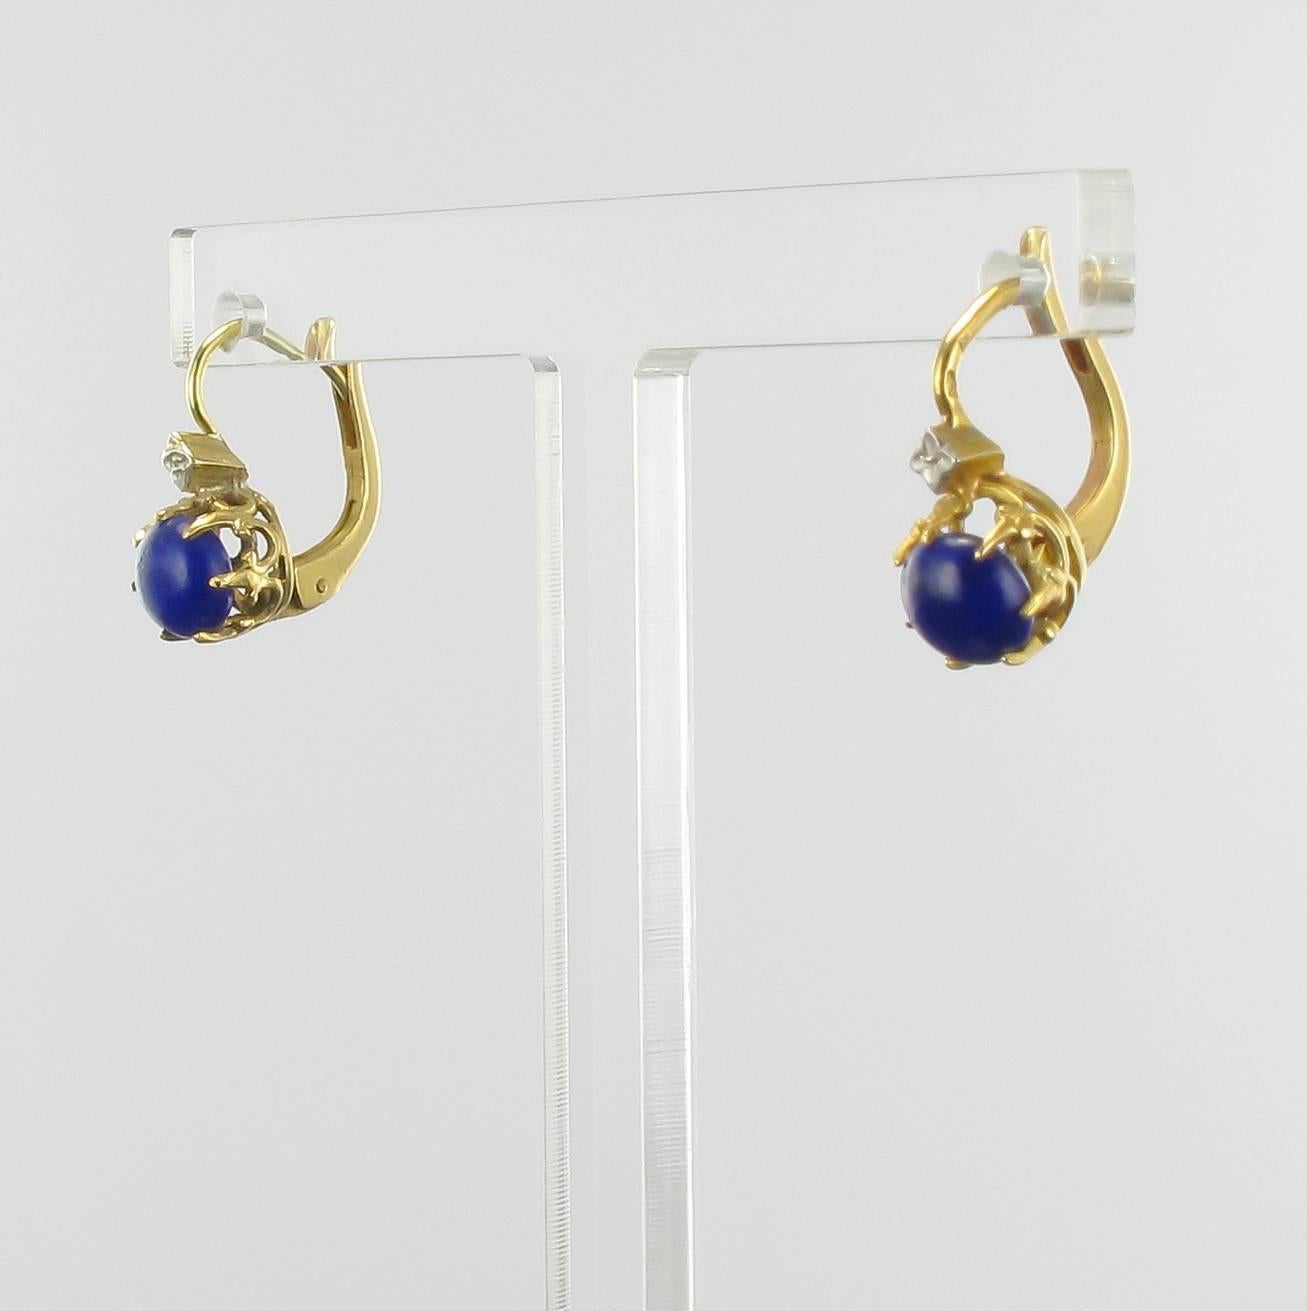 Earrings in 18 carat yellow gold, horse head hallmark. 

These stunning yellow gold sleeper earrings are set with lapis lazuli cabochons held by fleur-de-lis claws with small white gold motifs above. 

Diameter of lapis lazuli: 5.7 mm.
Overall